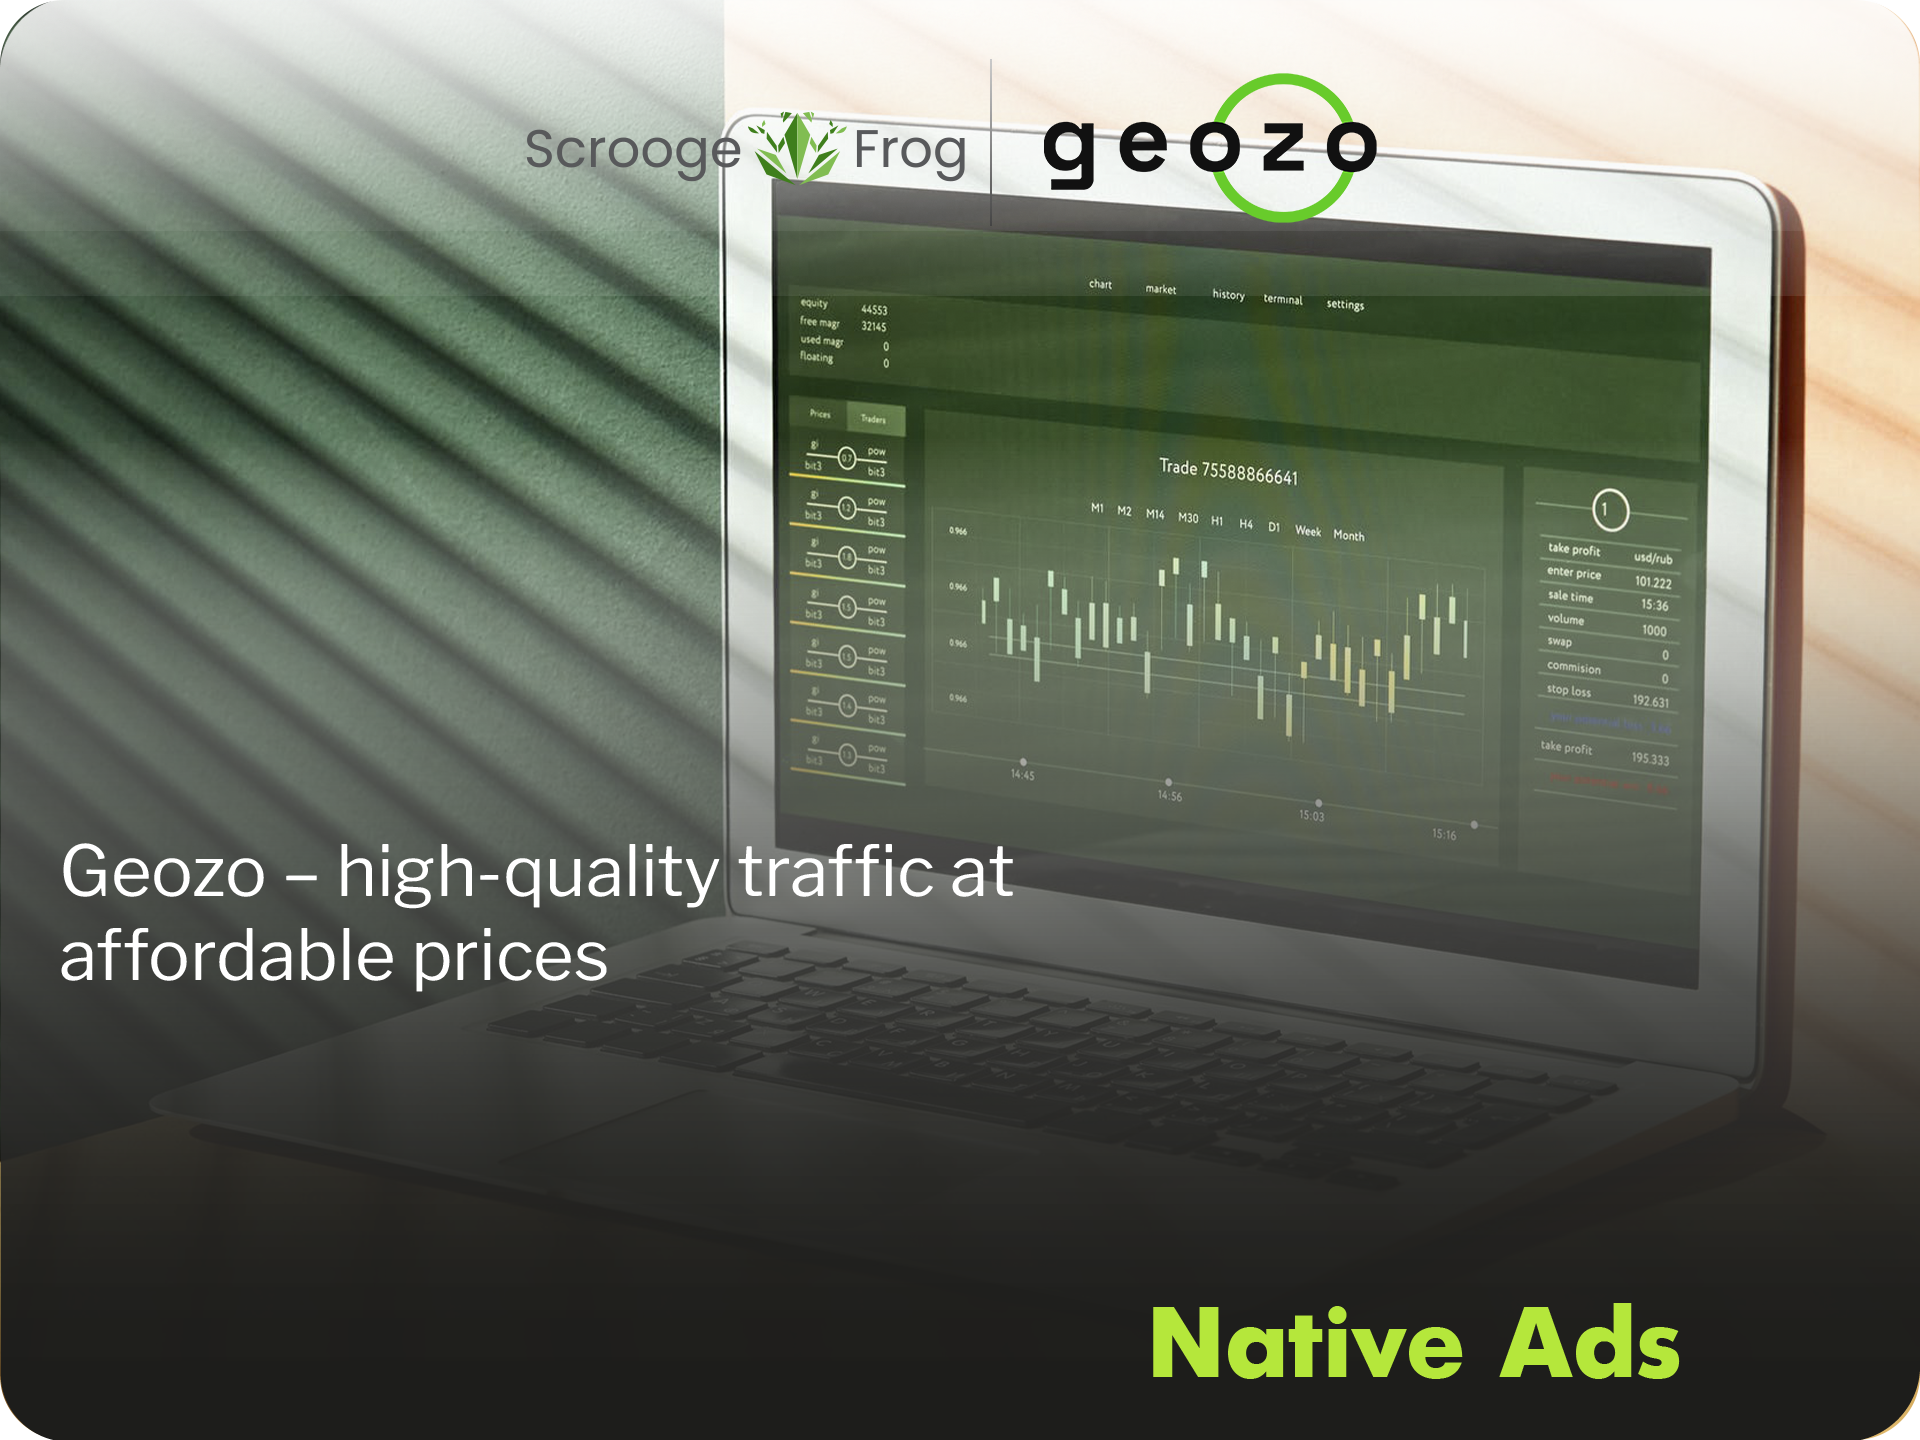 Geozo – high-quality traffic at affordable prices